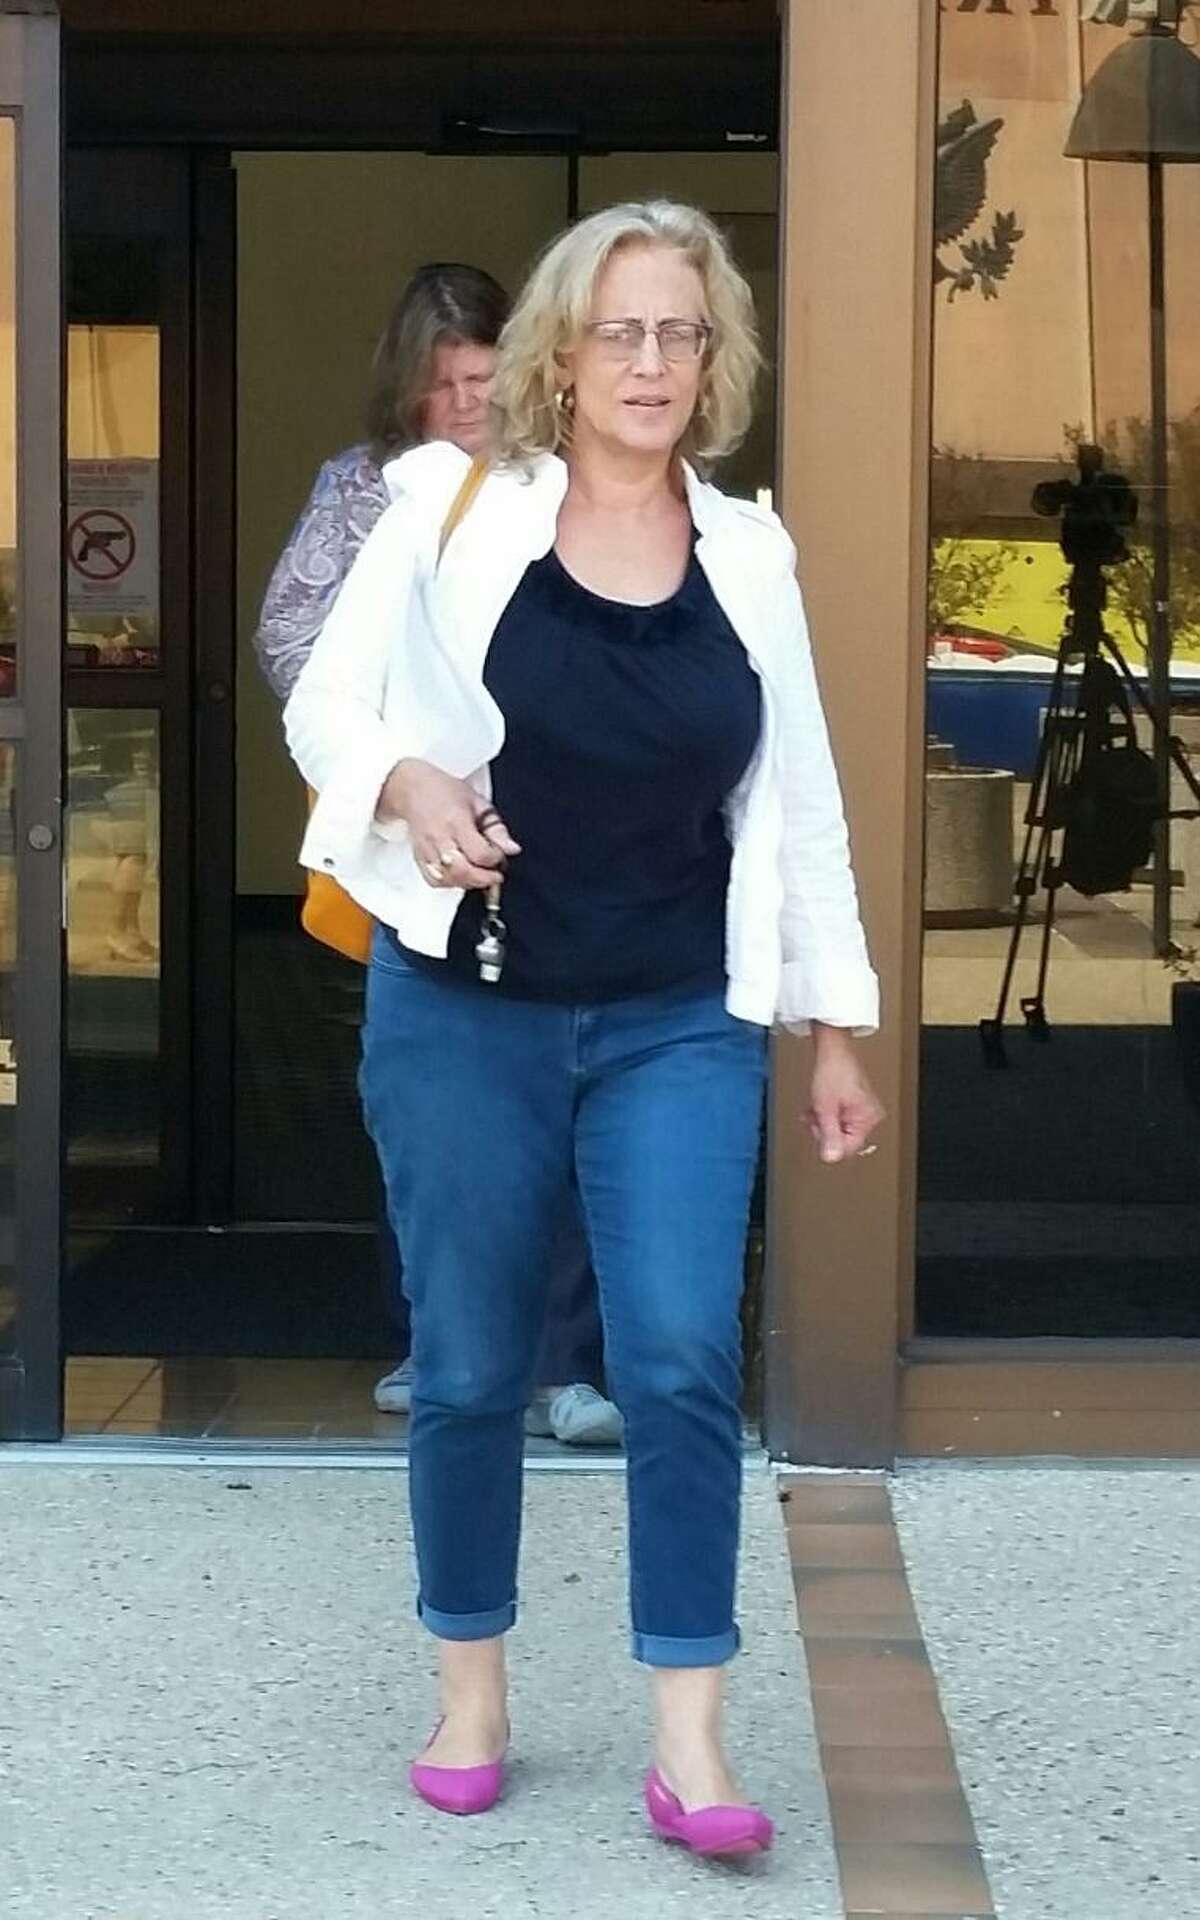 Jodi Mann, who describes herself as "Conspiracy Granny," leaves San Antonio's federal courthouse on Tuesday, May, 29, 2018, after her boyfriend, Robert Mikell Ussery, was denied bail. Ussery was arrested on a gun charge in the aftermath of the pair's confrontation in March with the pastor of the First Baptist Church of Sutherland Springs. Ussery and Mann claim the November massacre, in which 26 churchgoers were killed by a gunman, is a "government hoax."